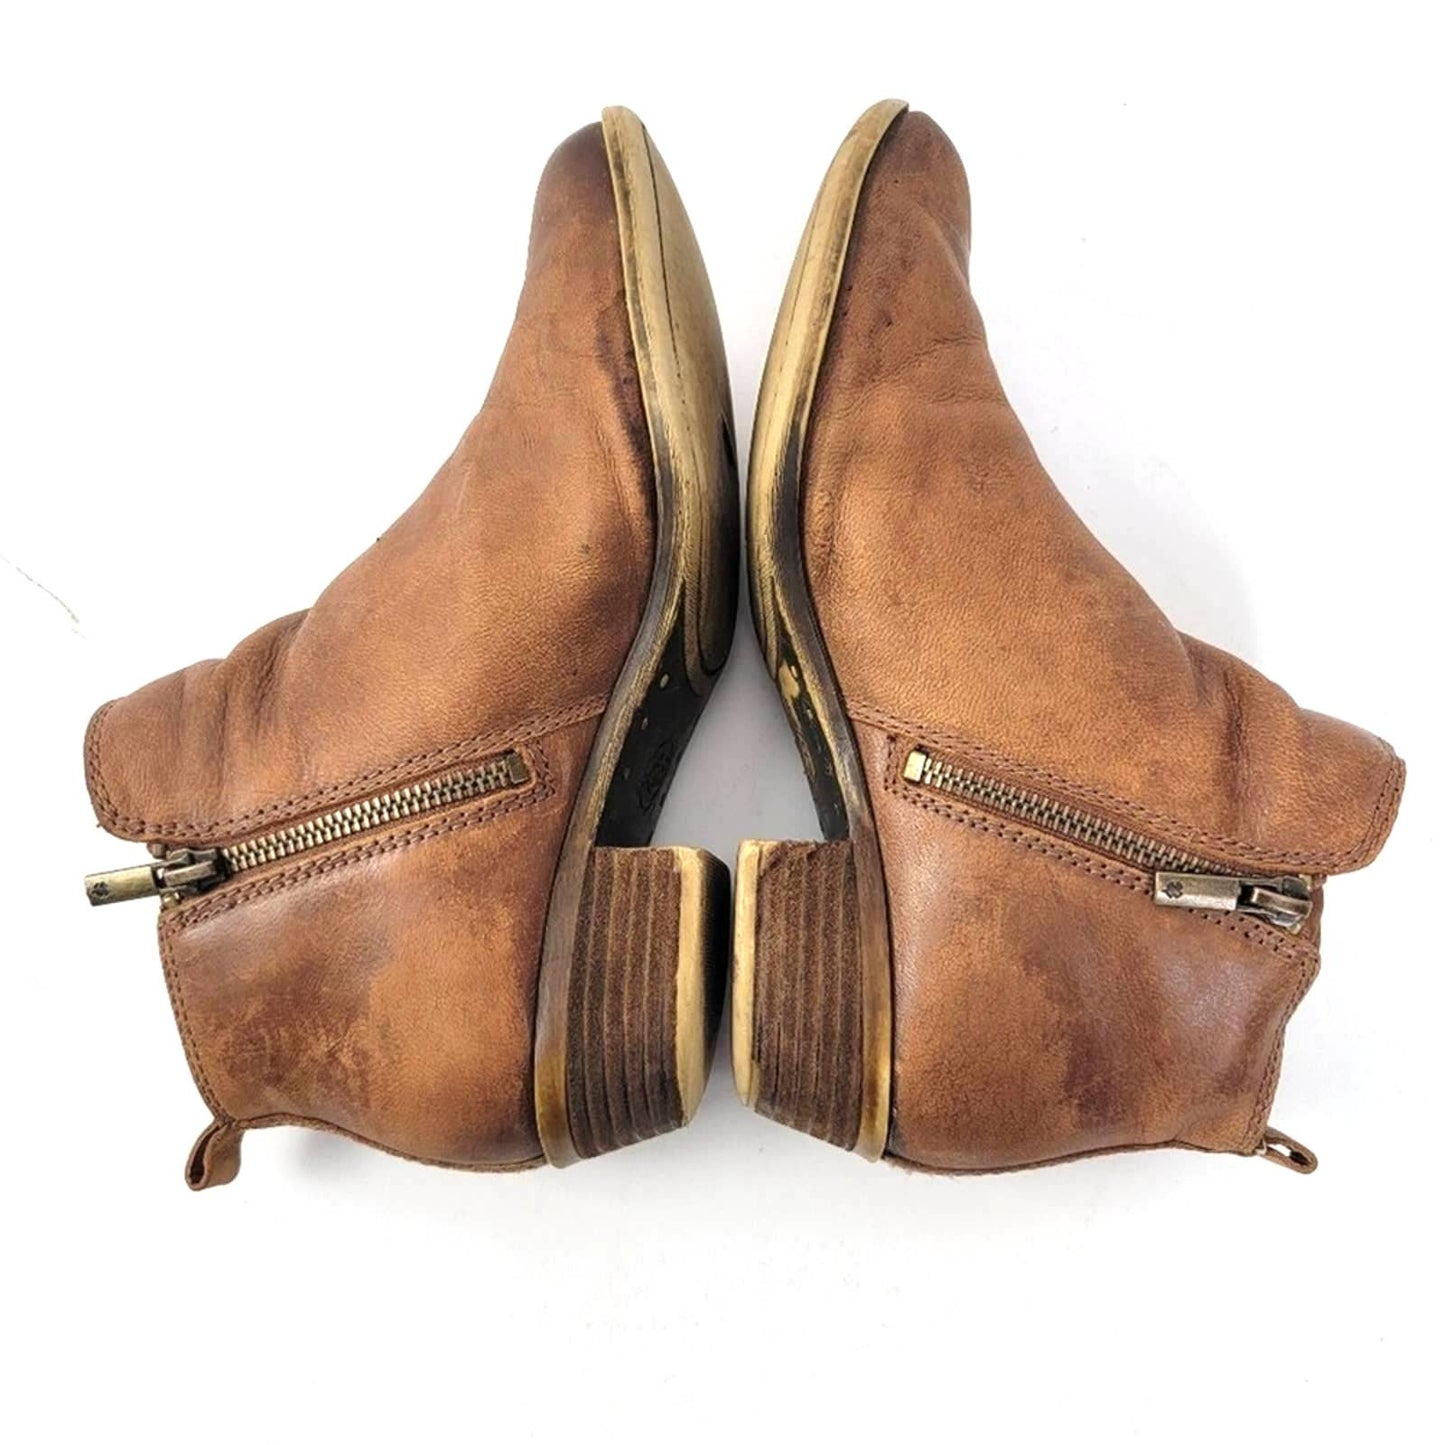 Lucky Brand Basel Bootie - Toffee - 8